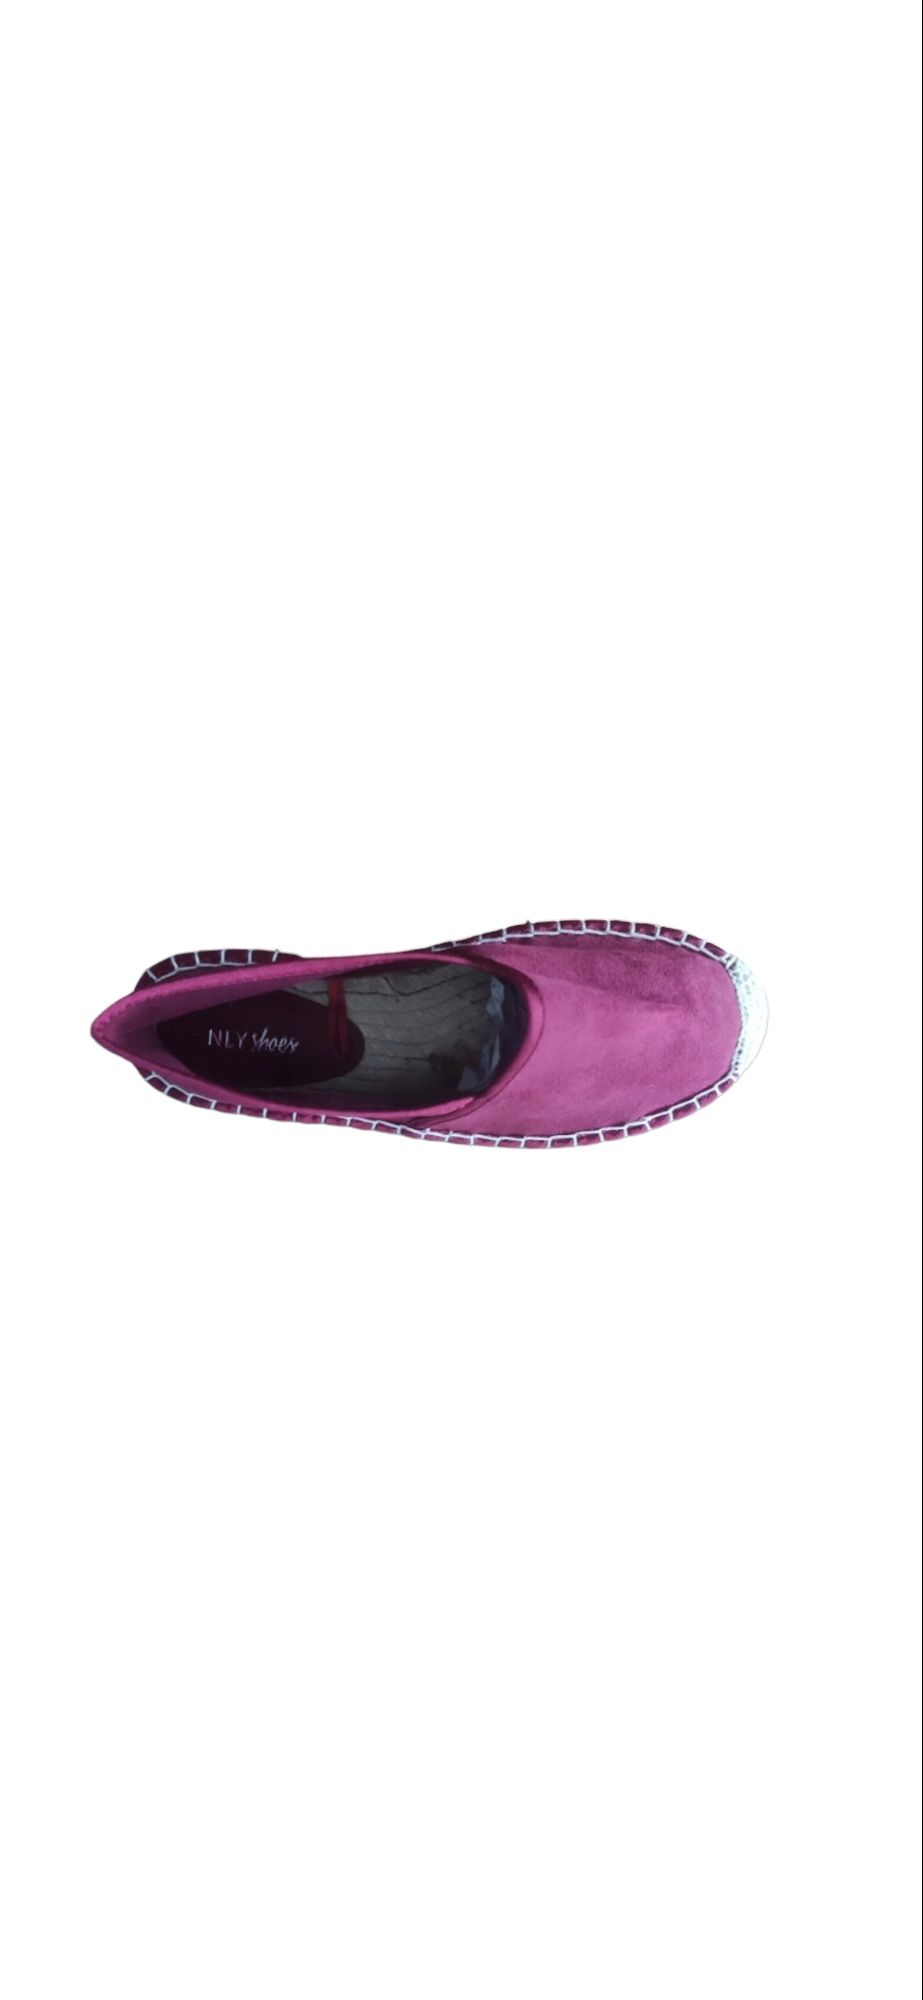 Baleriny NLY SHOES r.37